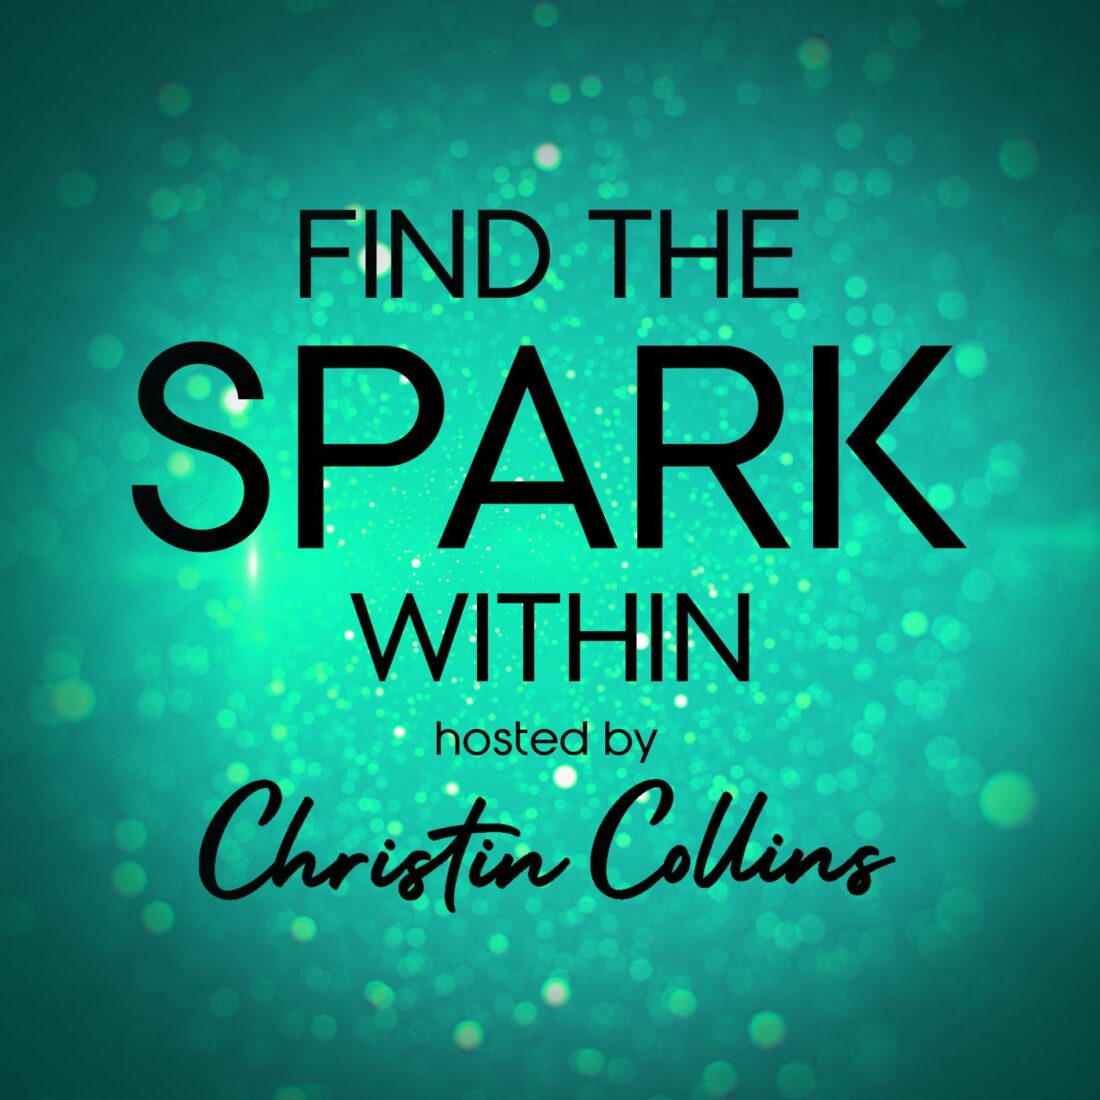 Find the spark within